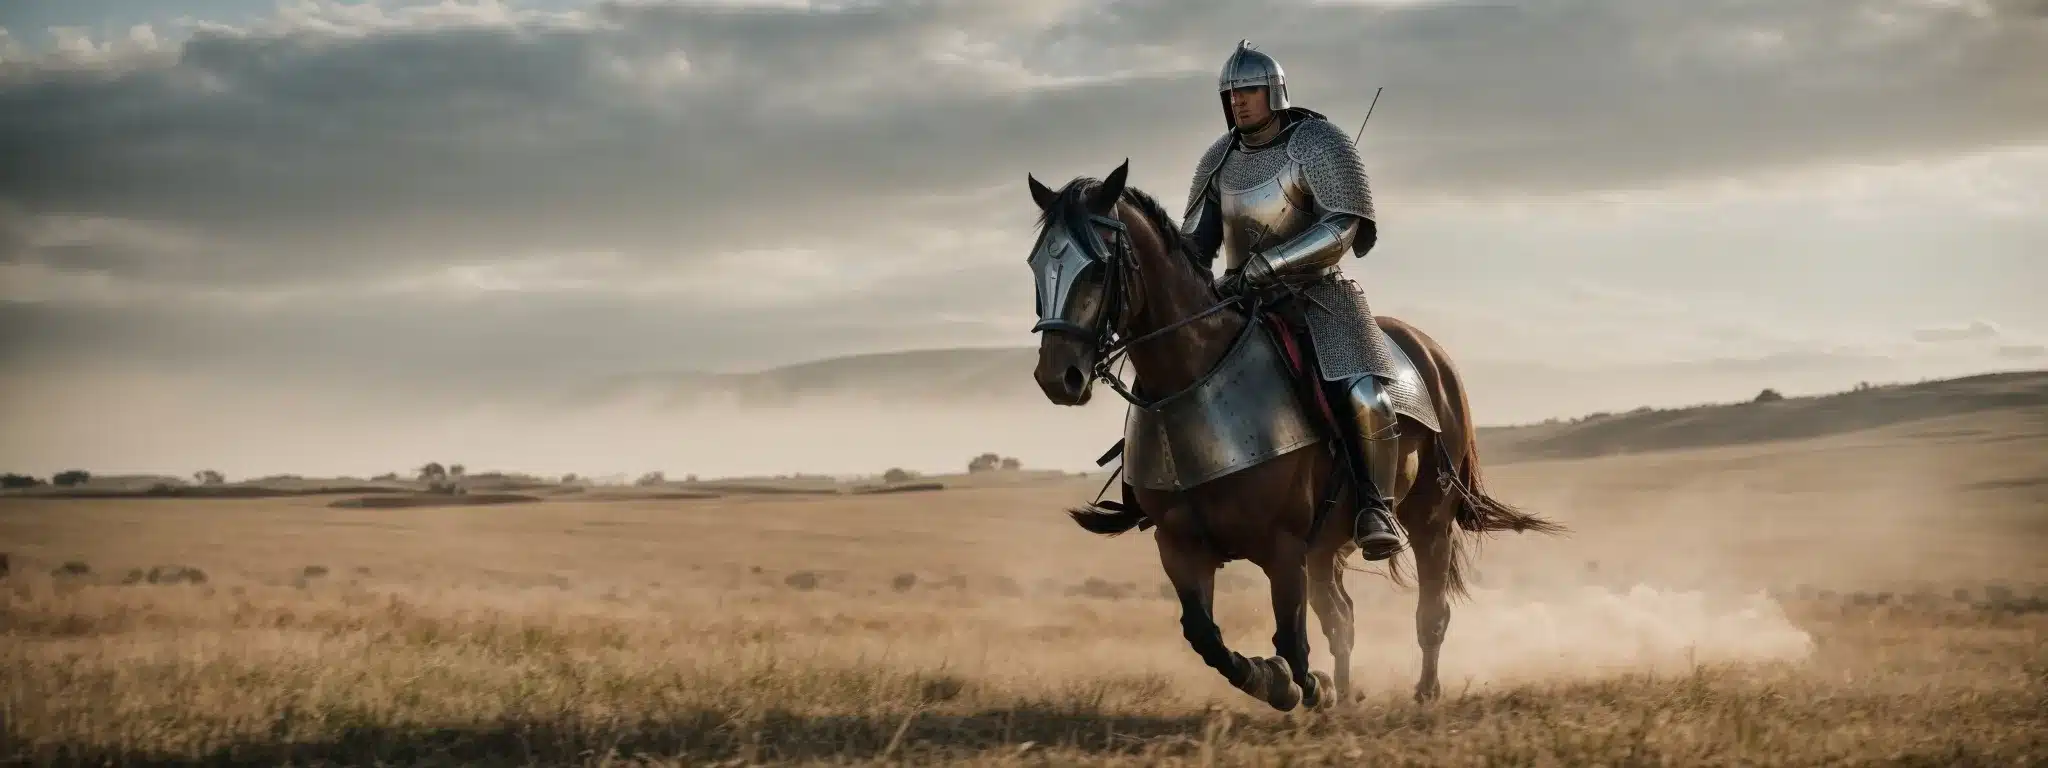 A Medieval Knight In Shining Armor Charging Across An Open Field With A Lance Poised For Action.